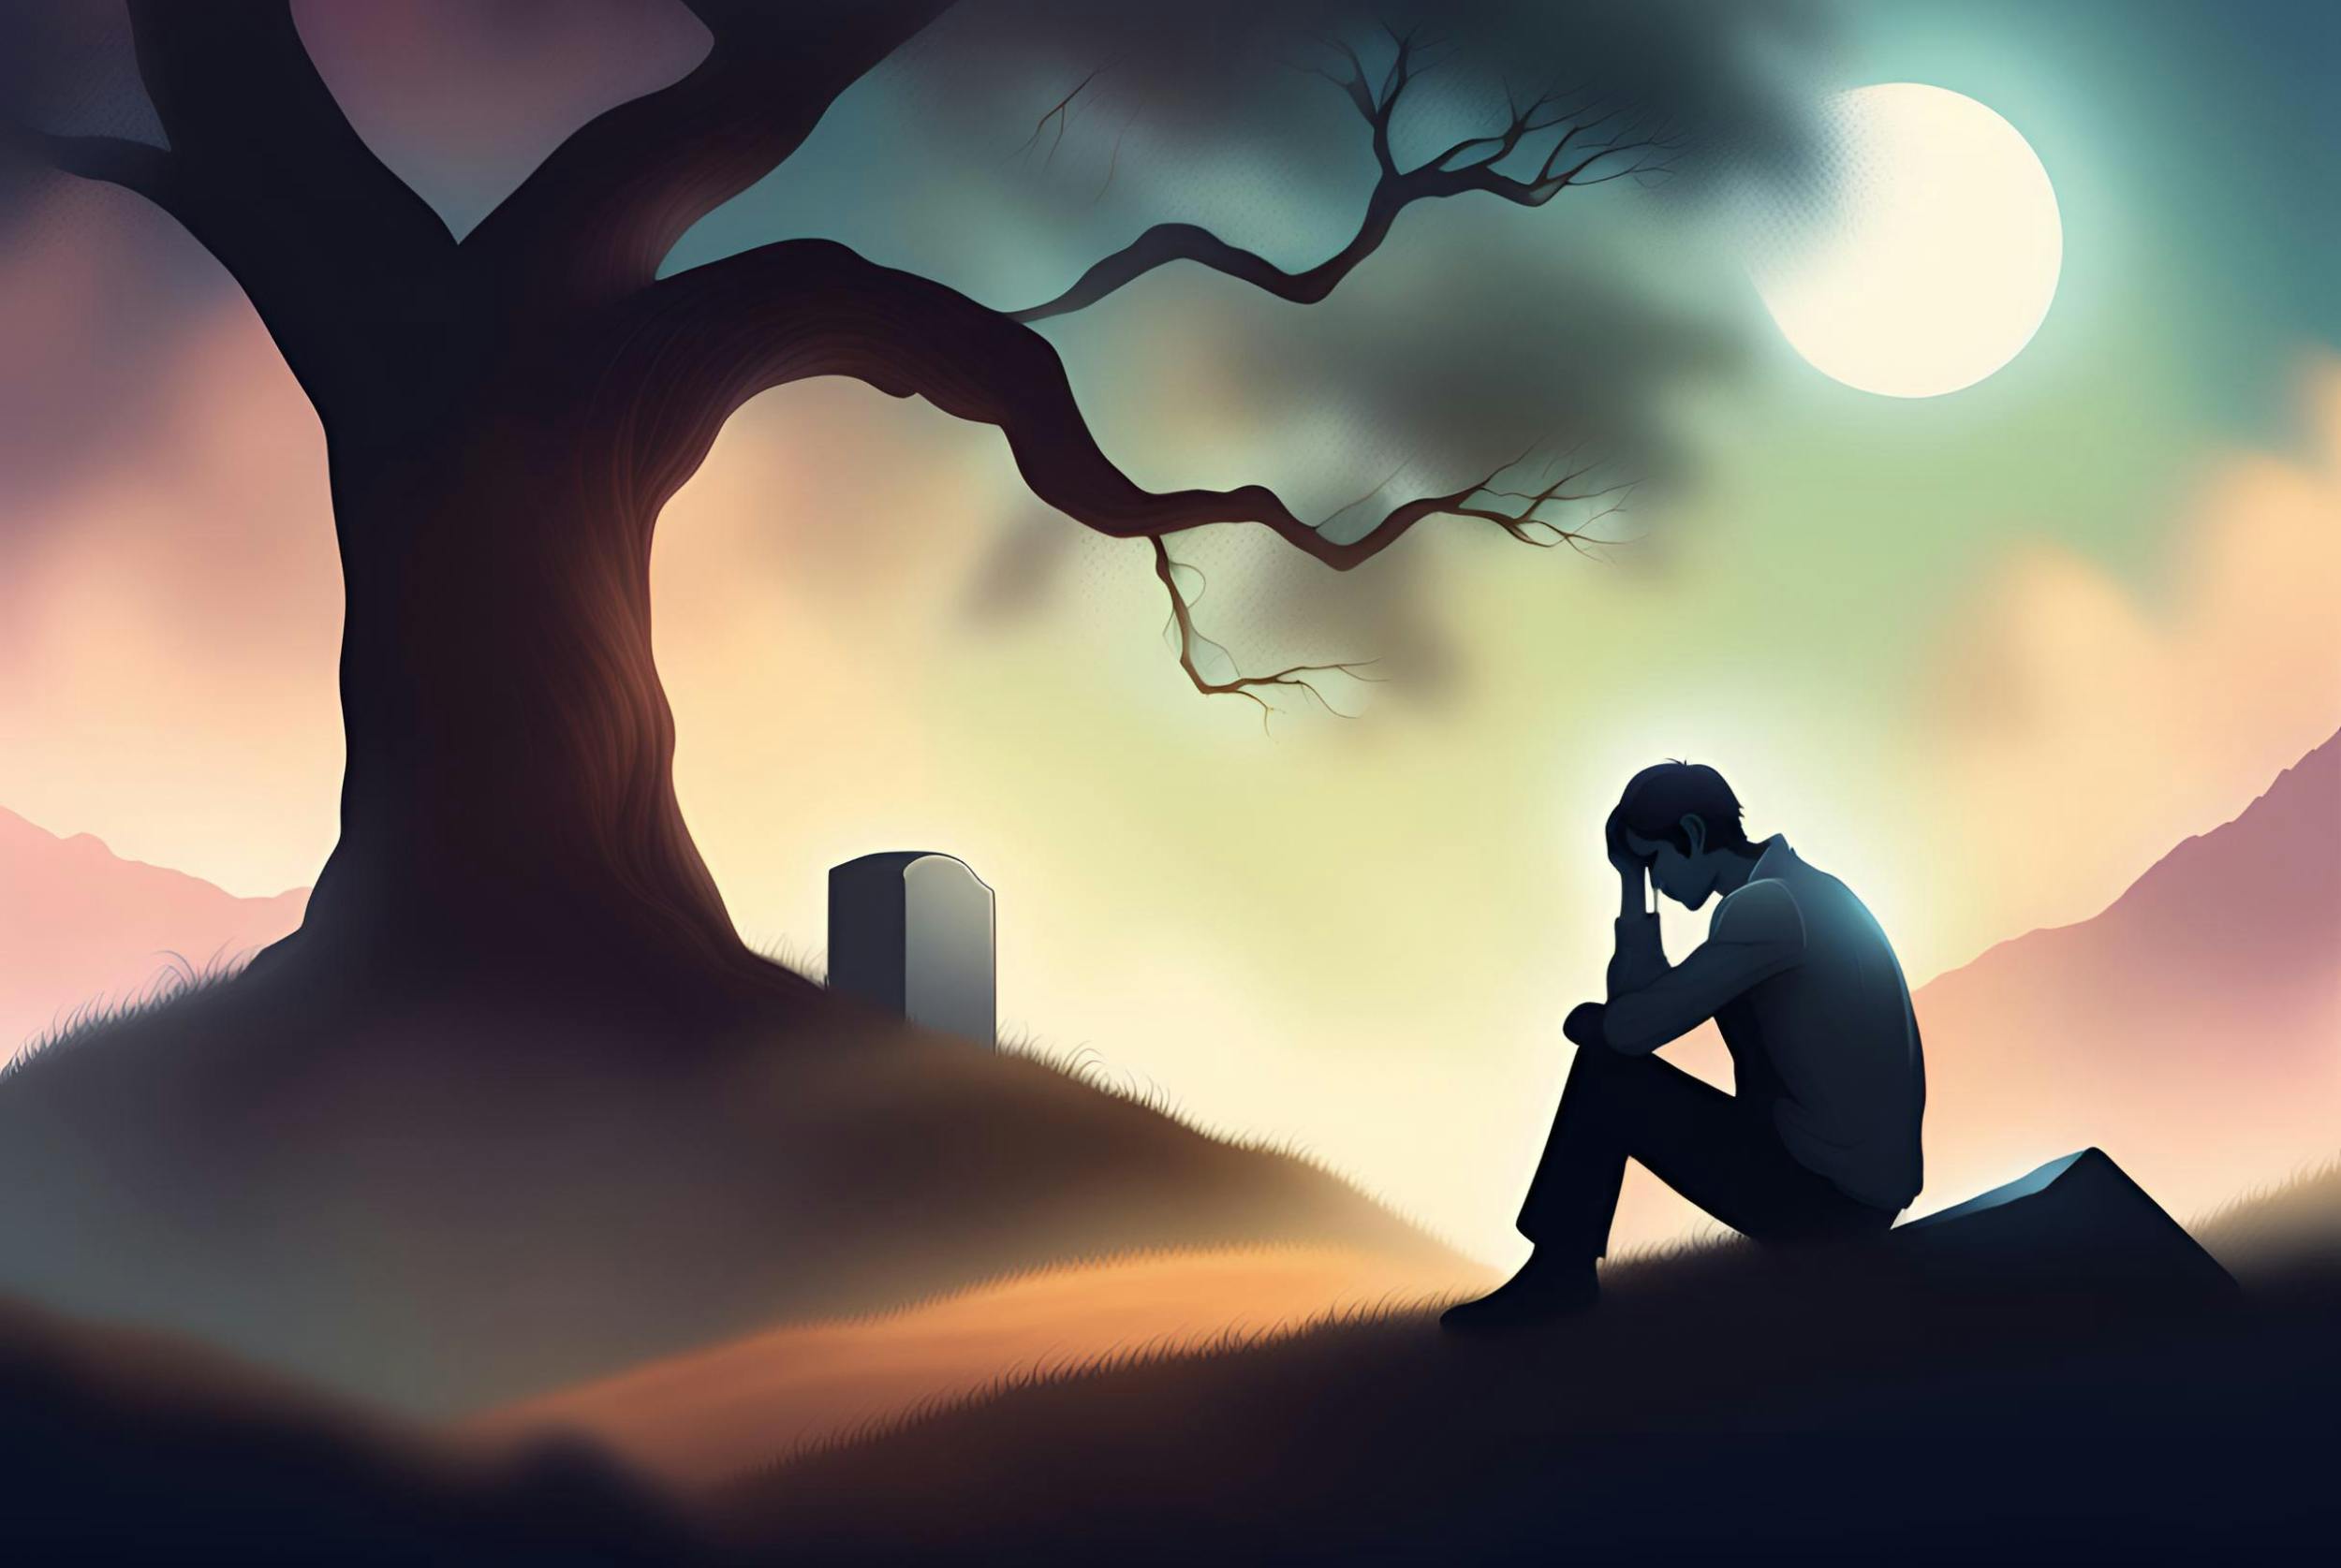 Illustration of a sad man sitting in a cemetery near a tree